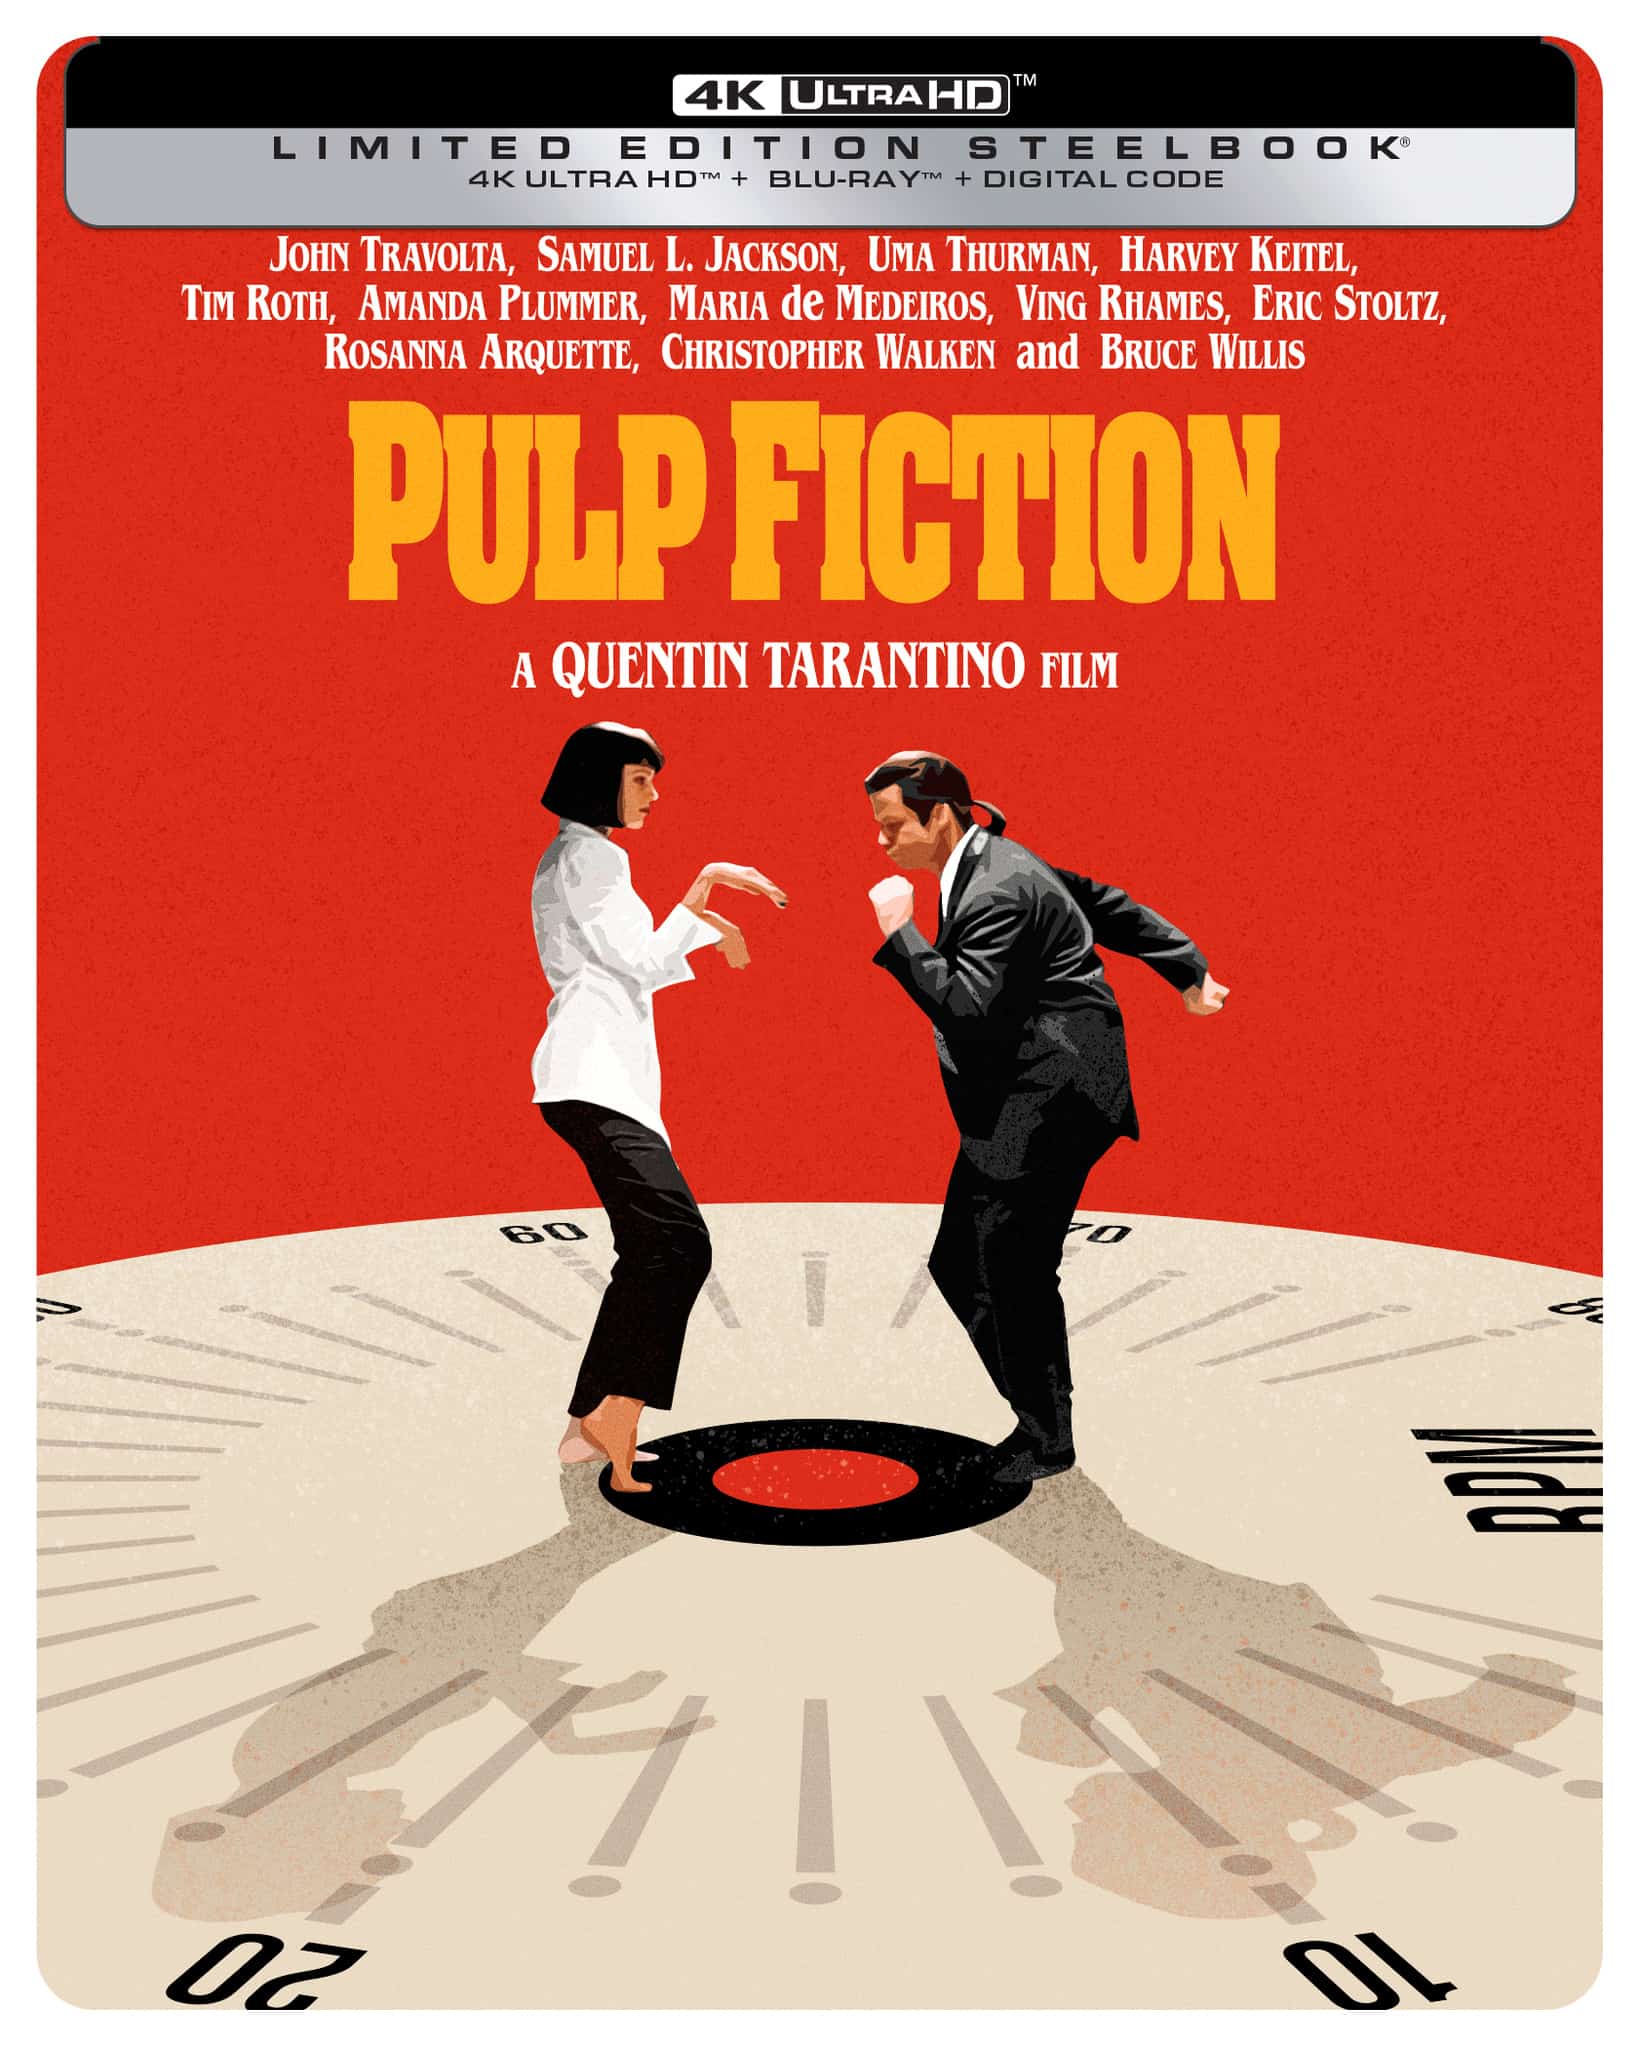 Pulp Fiction comes to 4K